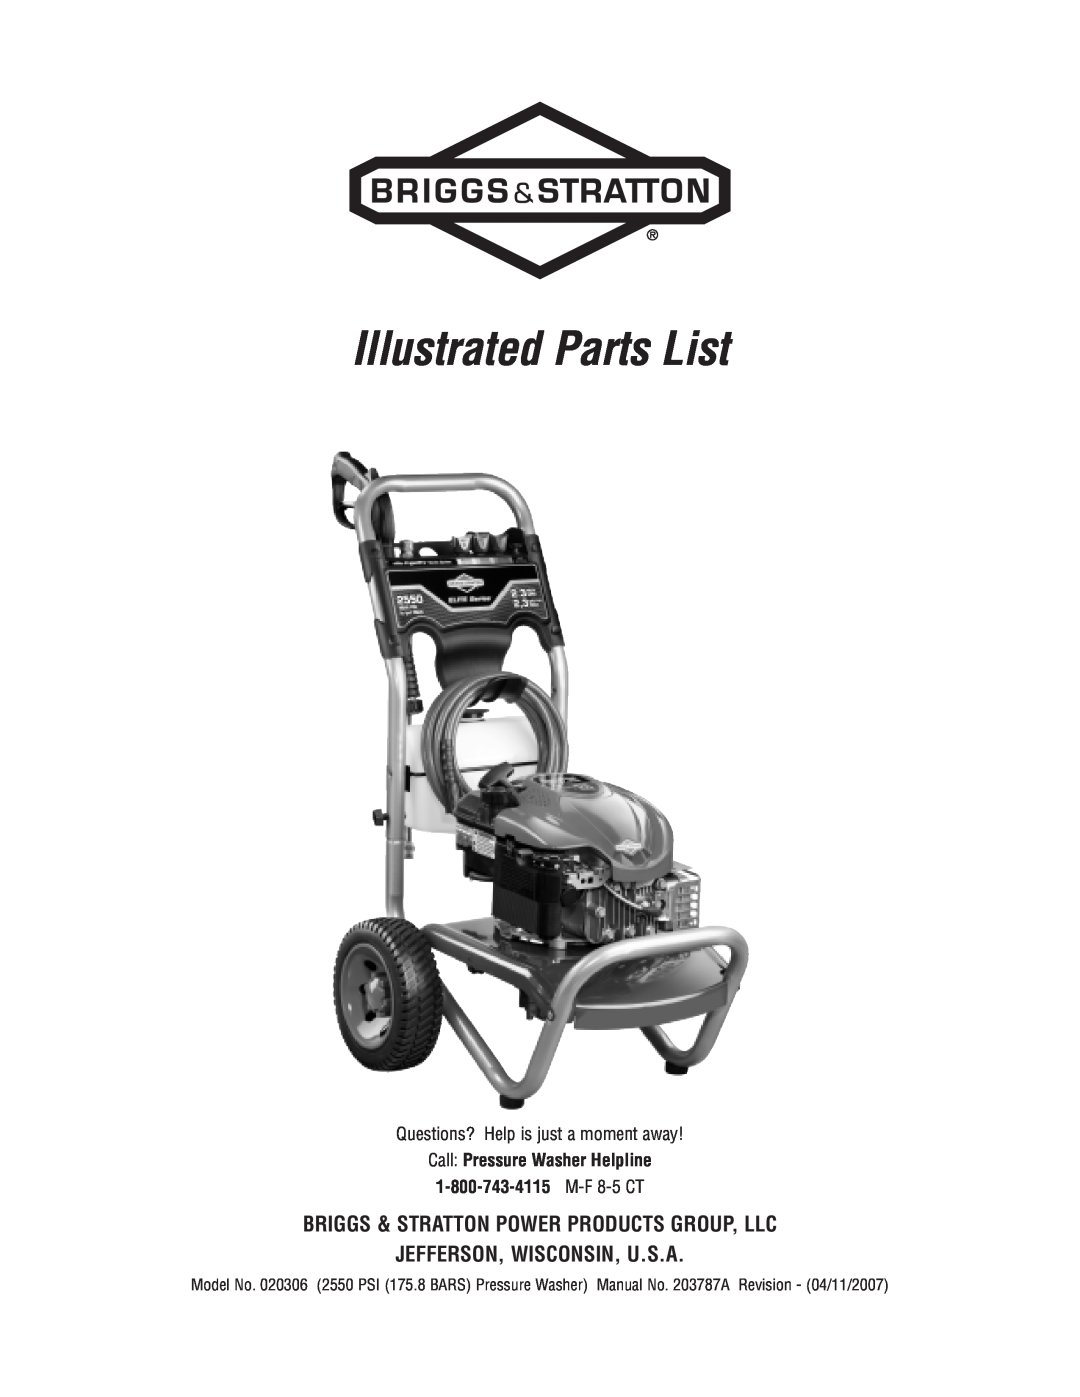 Briggs & Stratton 20306 manual Illustrated Parts List, Briggs & Stratton Power Products Group, Llc 